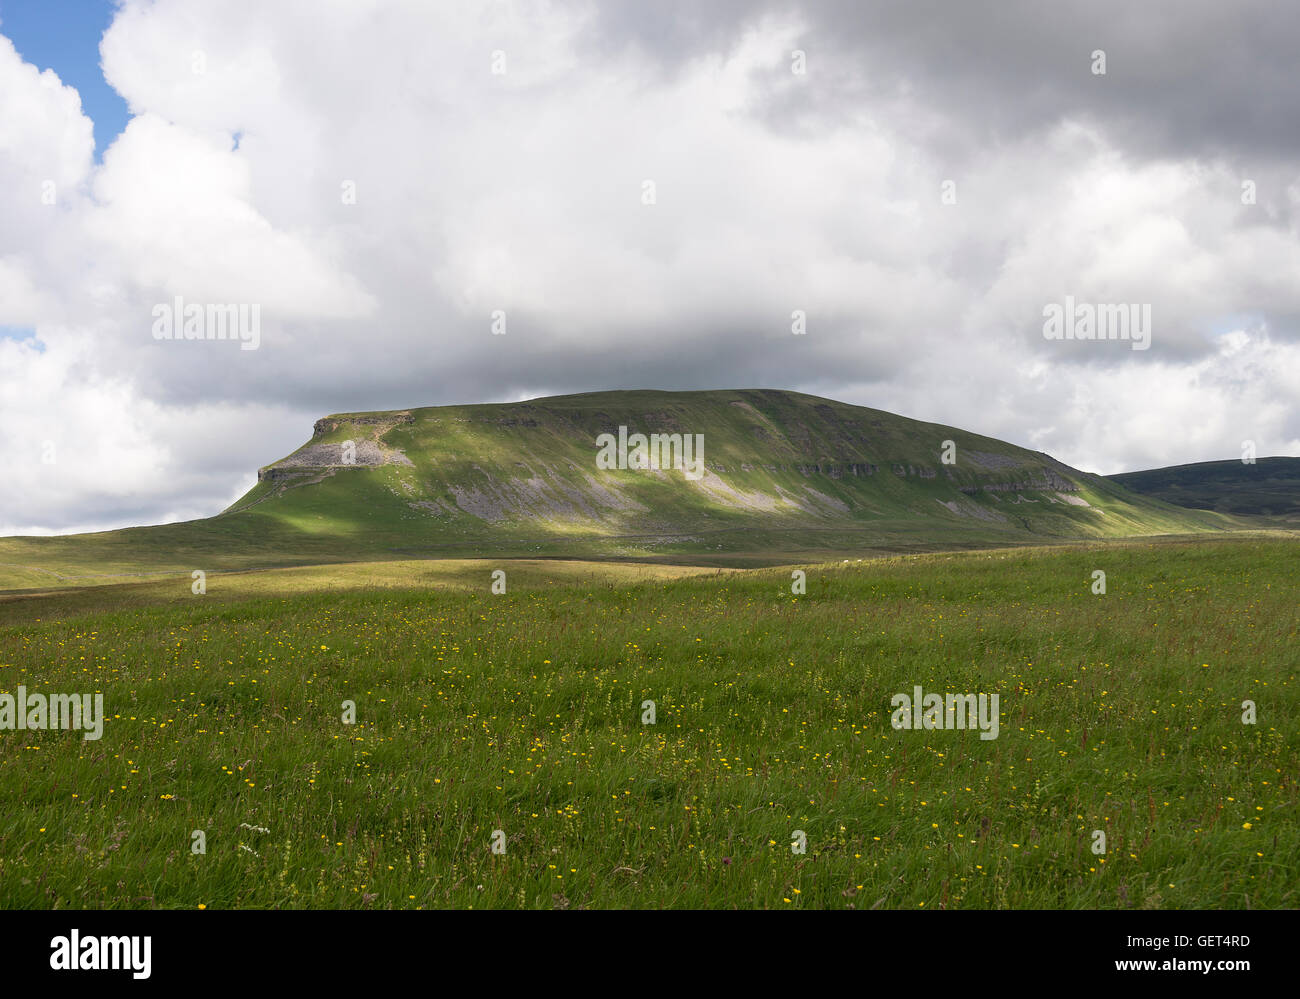 The Beautiful Penyghent Hill in The Yorkshire Dales near Horton in Ribblesdale England United Kingdom UK Stock Photo